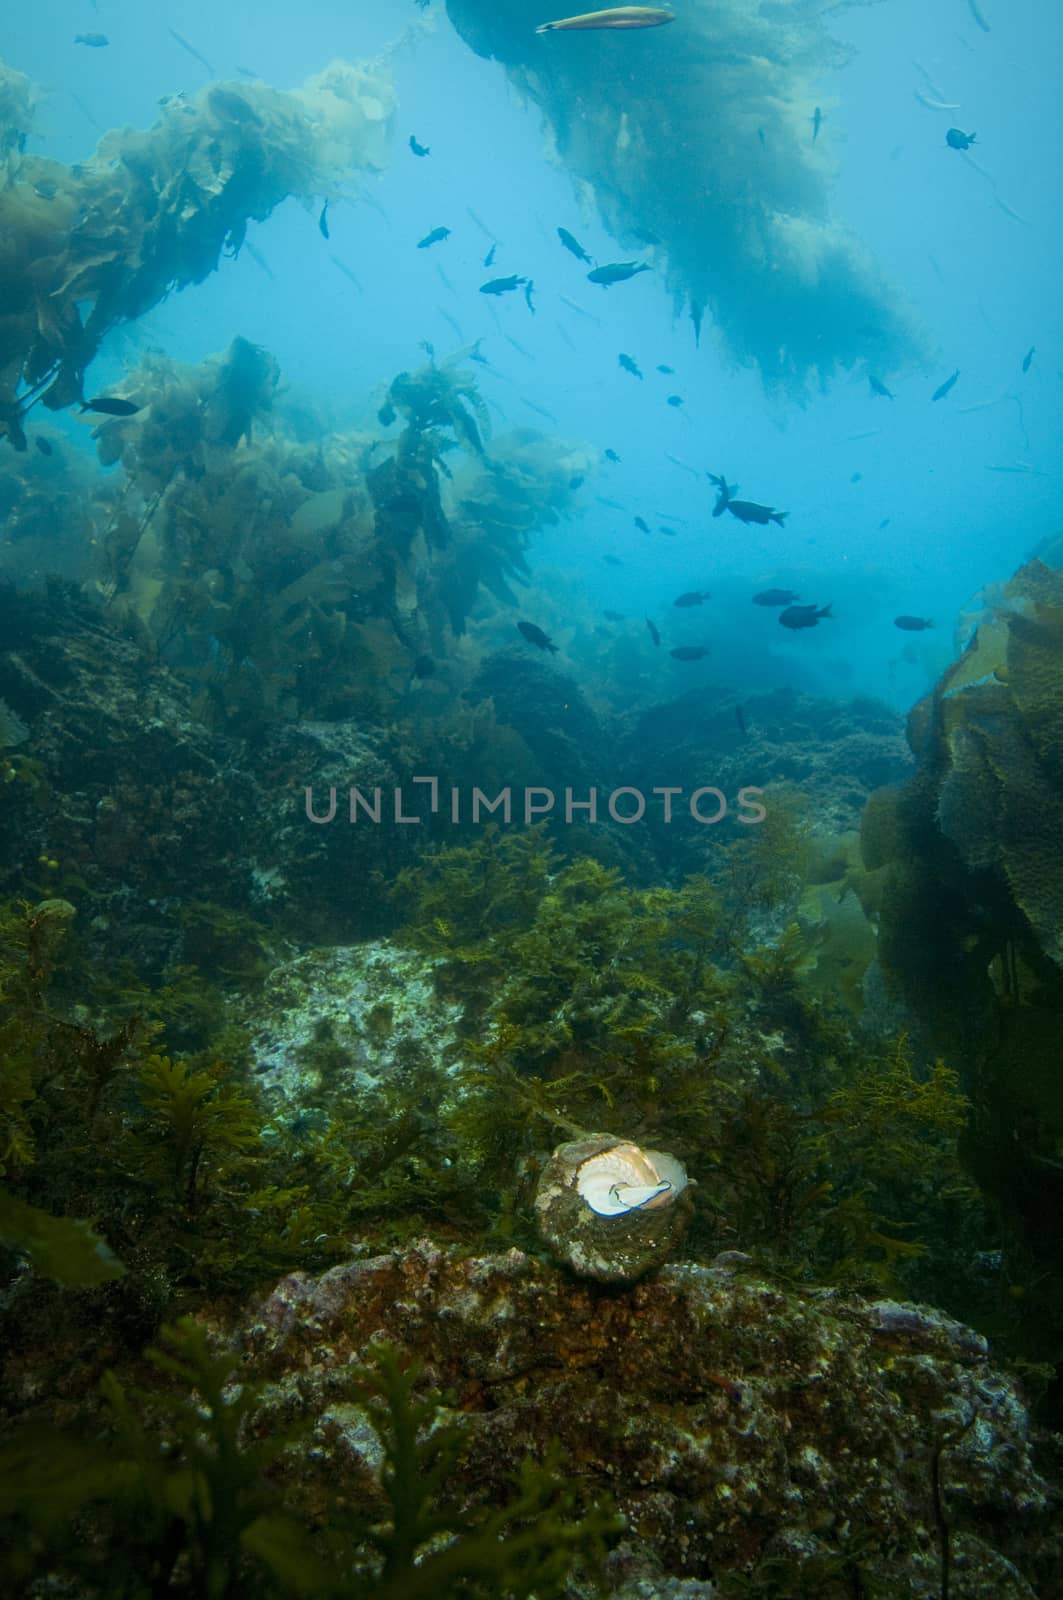 Large shell in underwater rocky reef off Catalina Island, CA by Njean